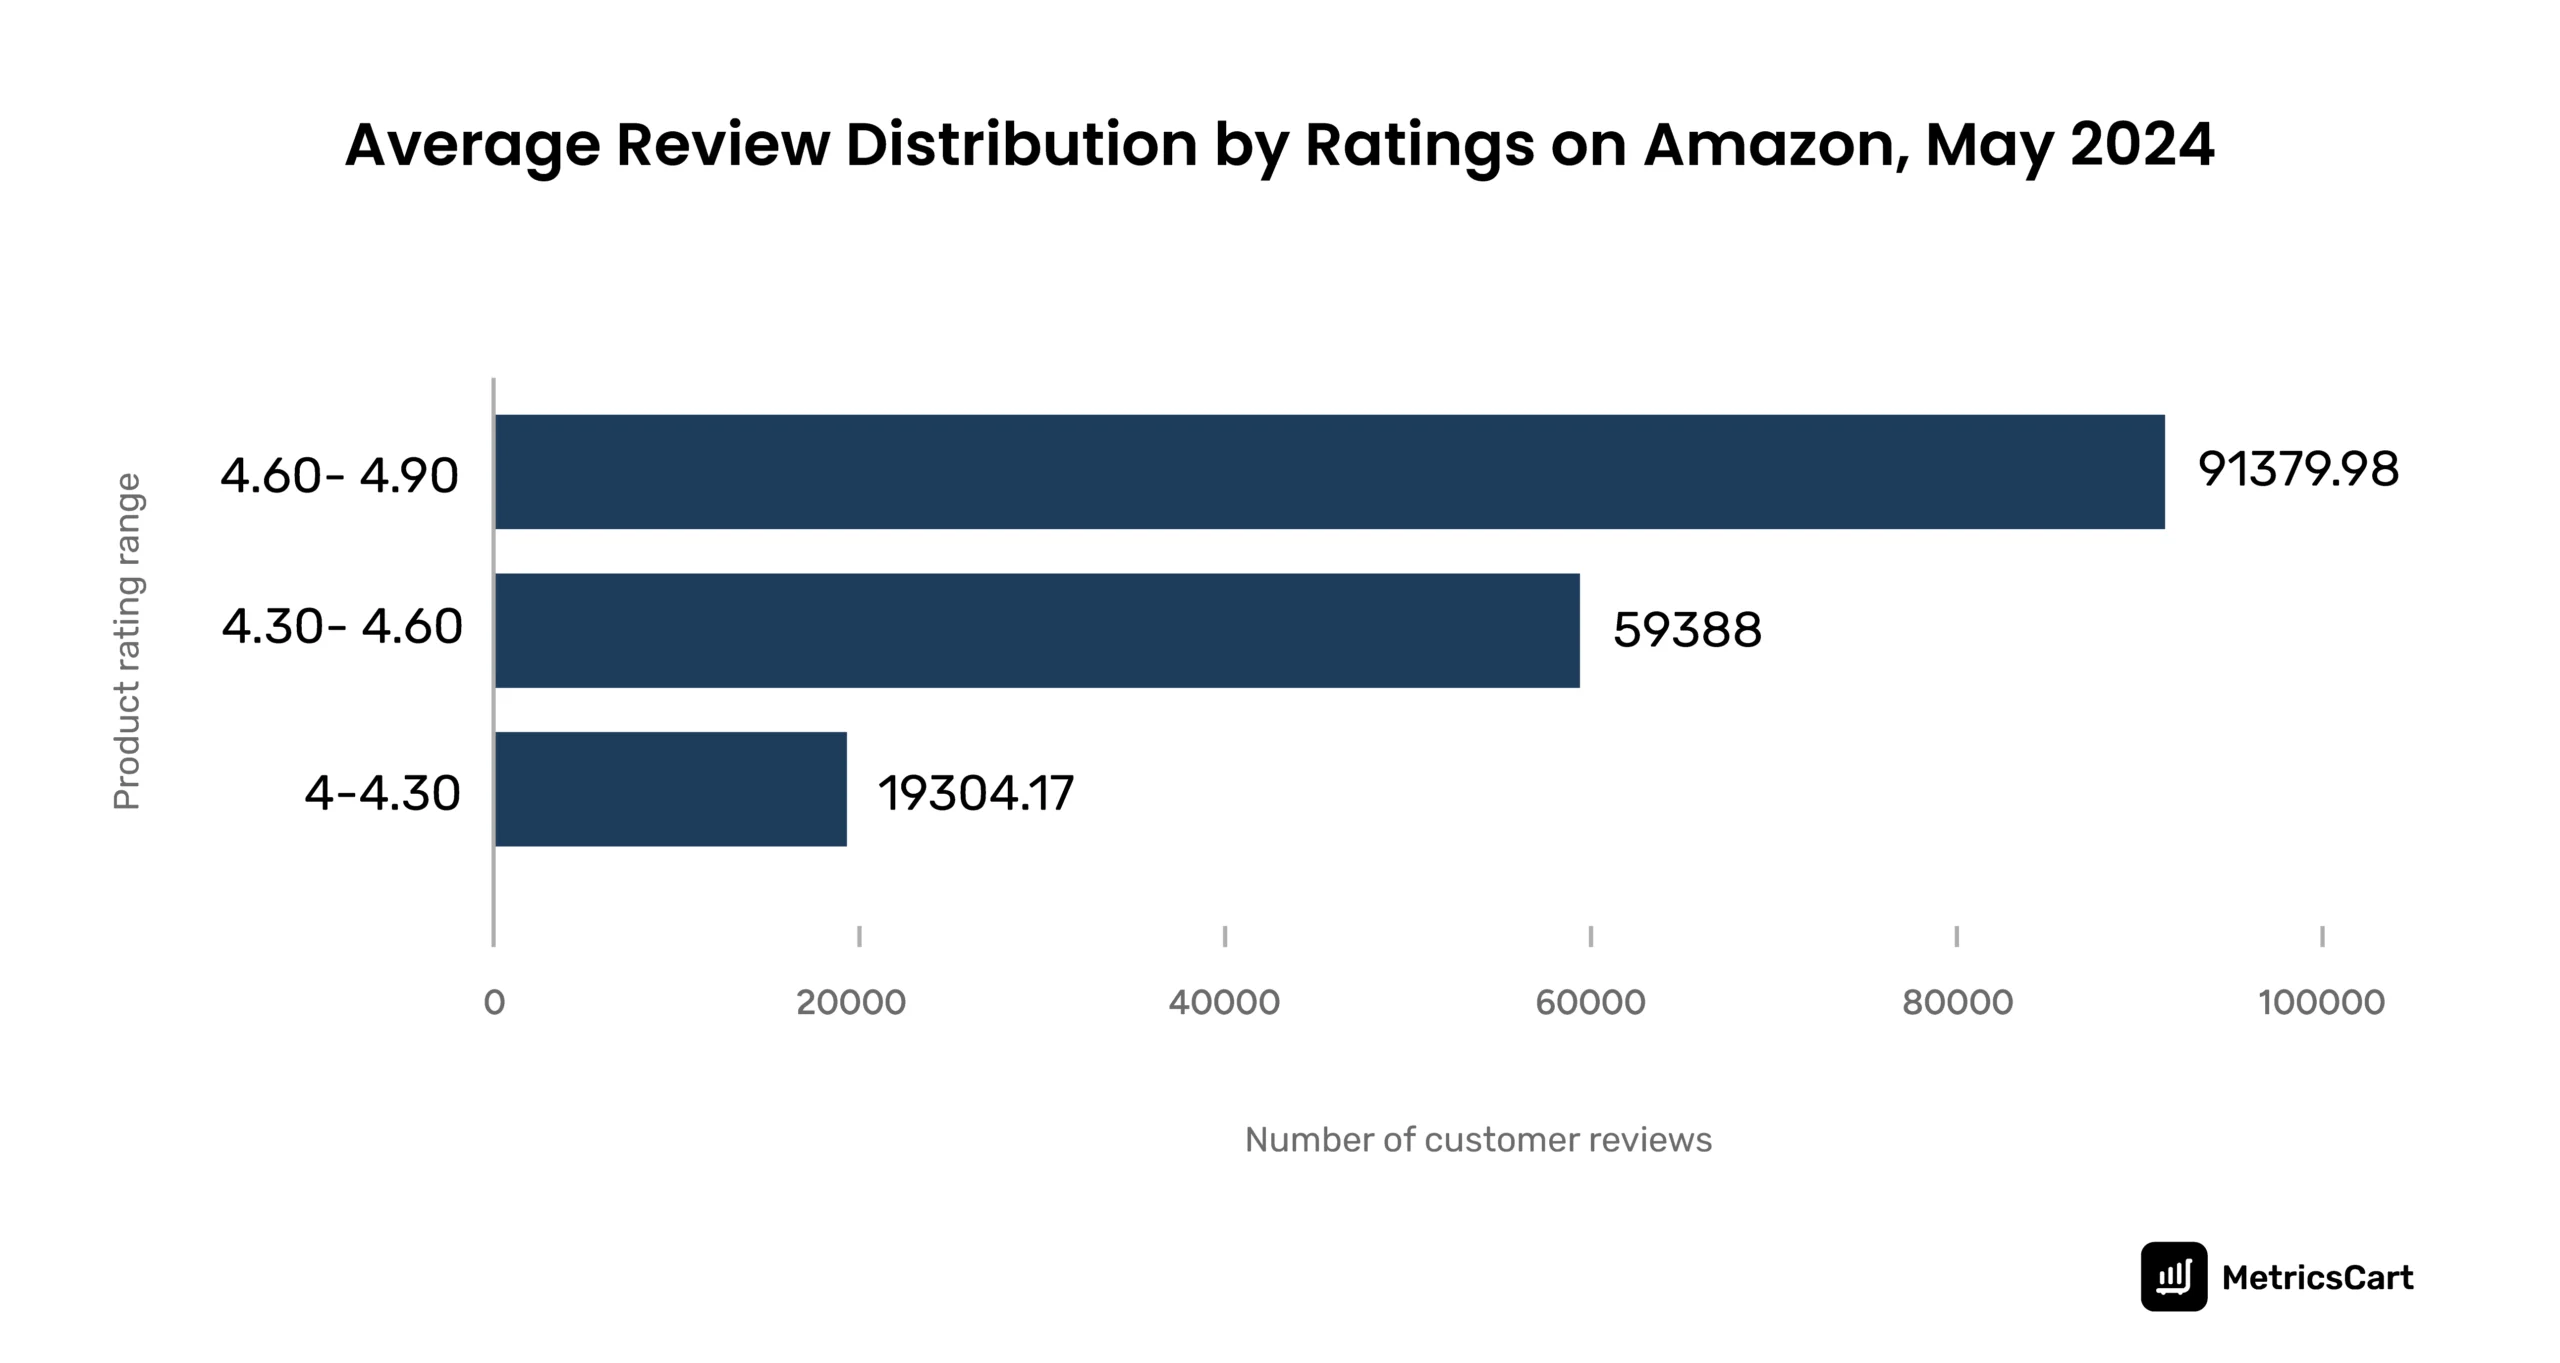 The image shows the average number of reviews that bestseller items with a 4.8 rating received on Amazon in 2024 for the health & household category.